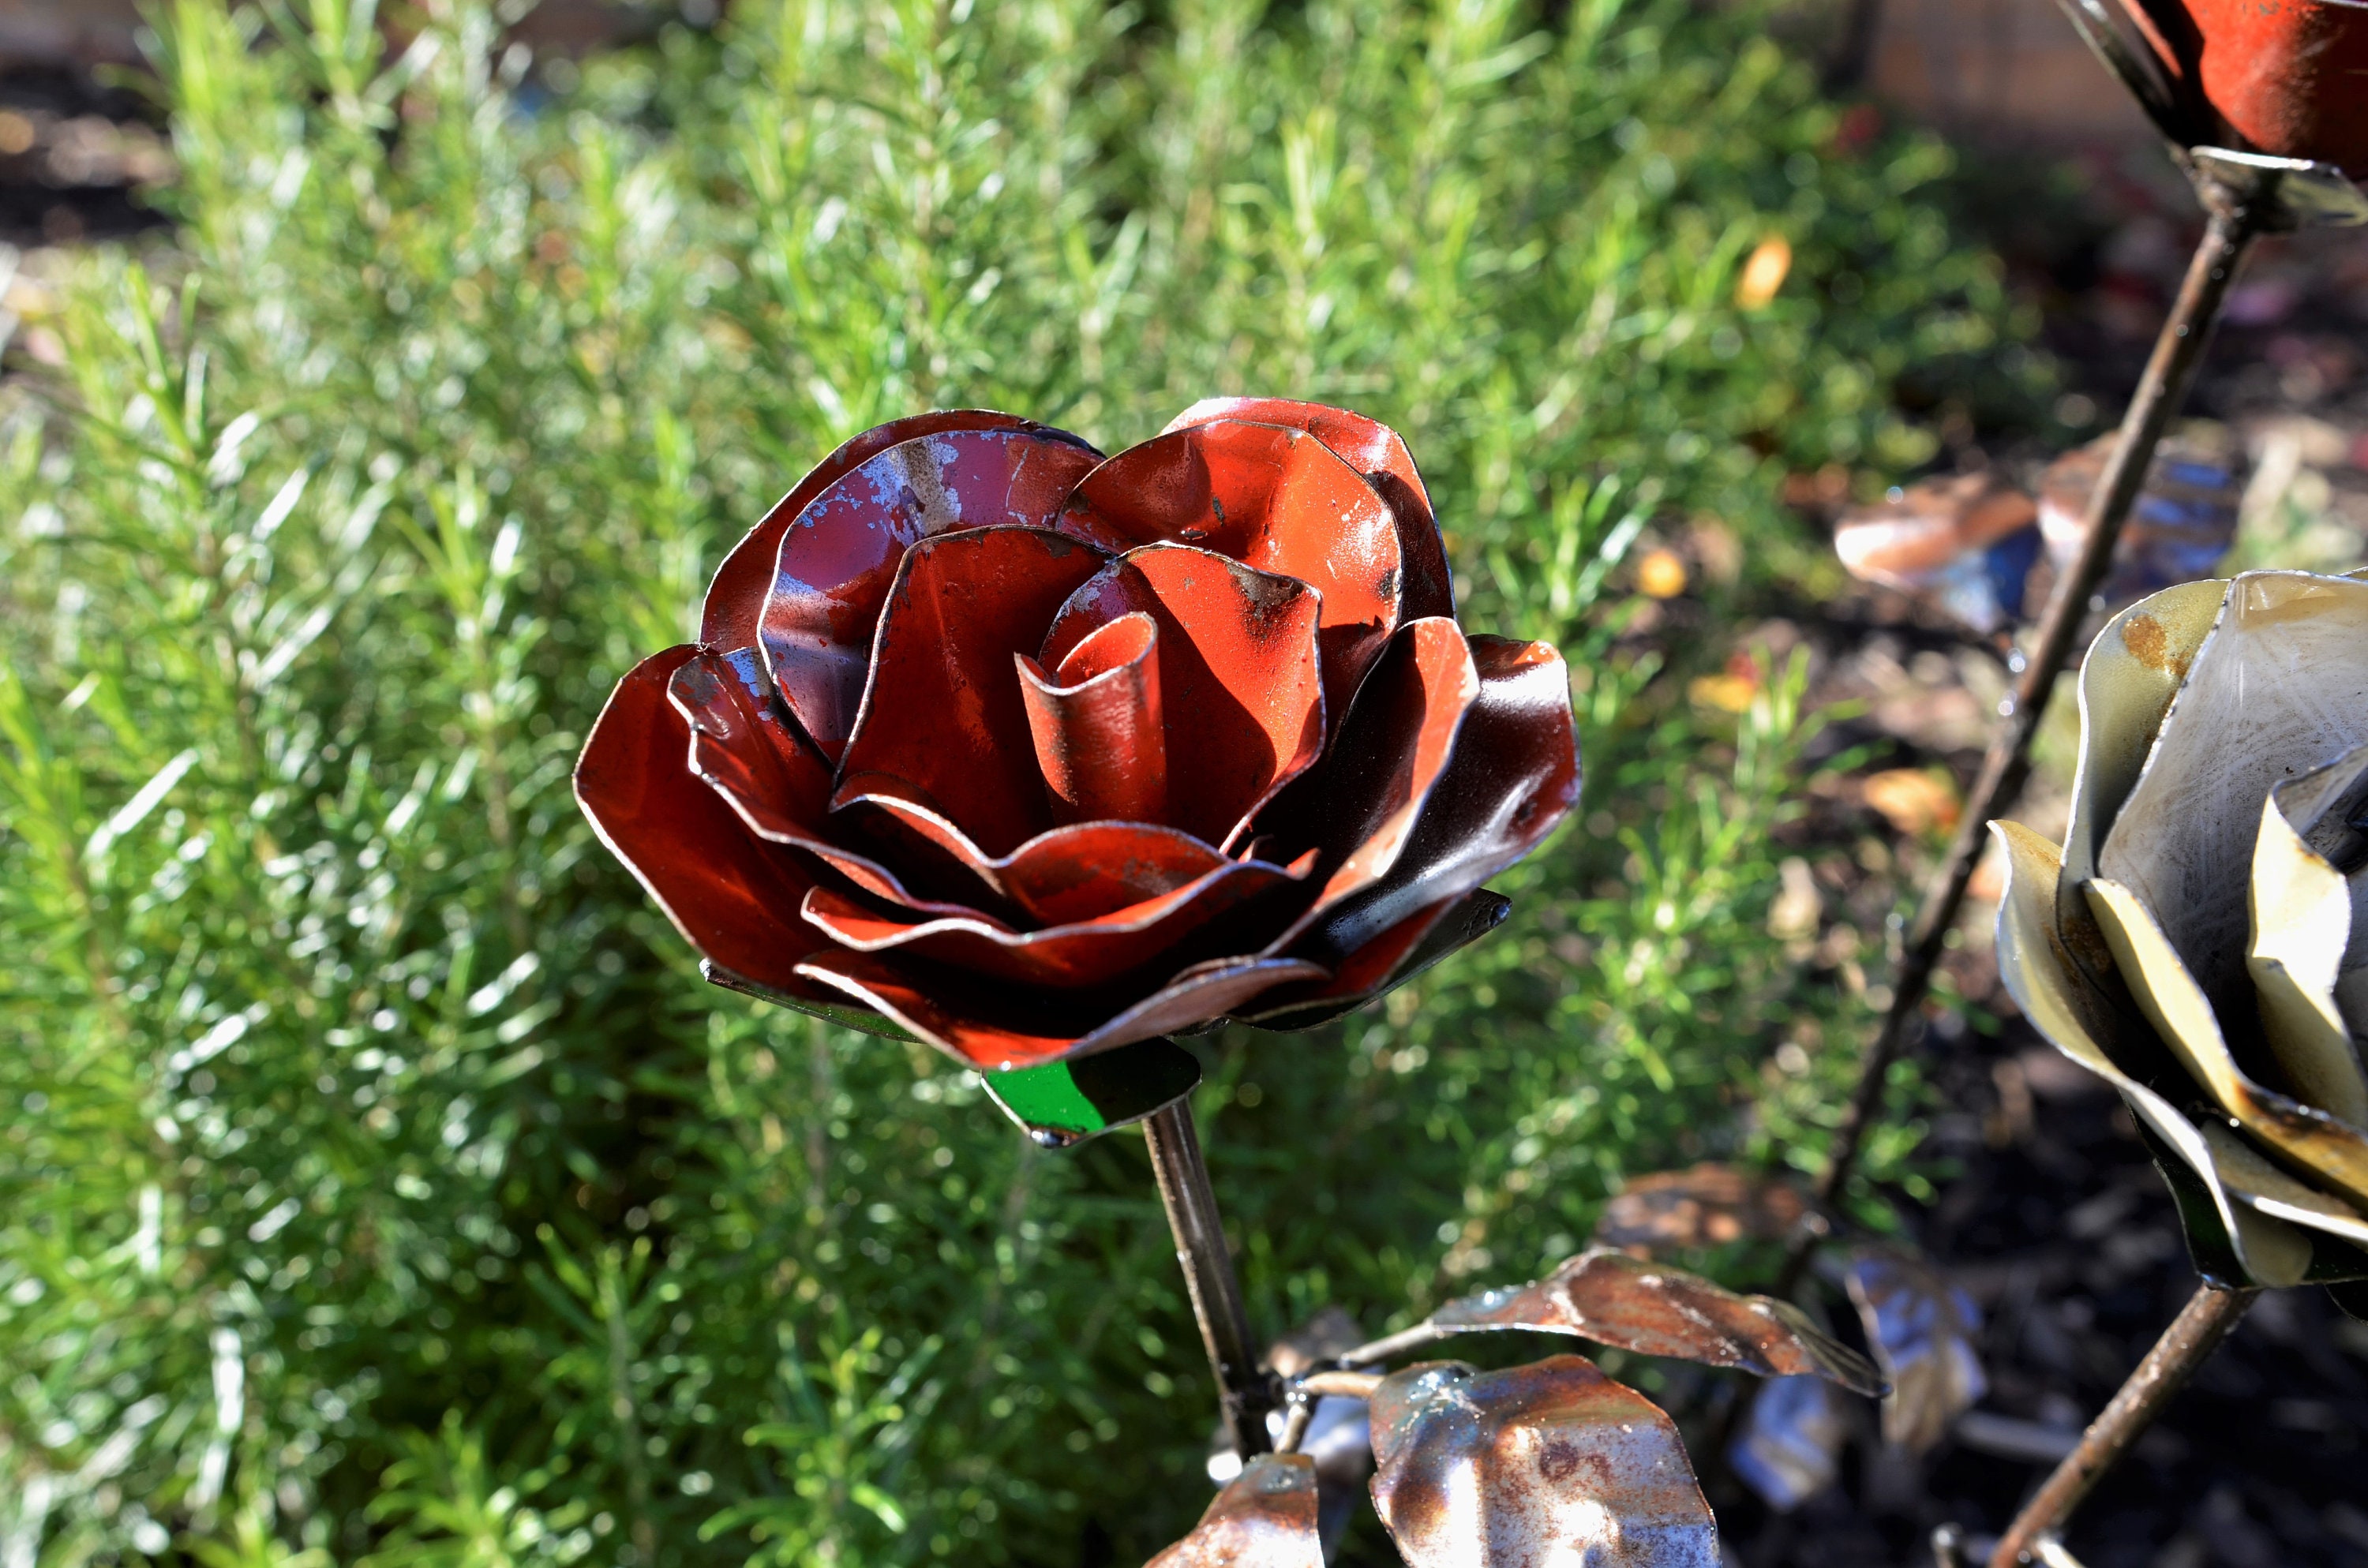 Metal Garden Ornaments - Photos All Recommendation